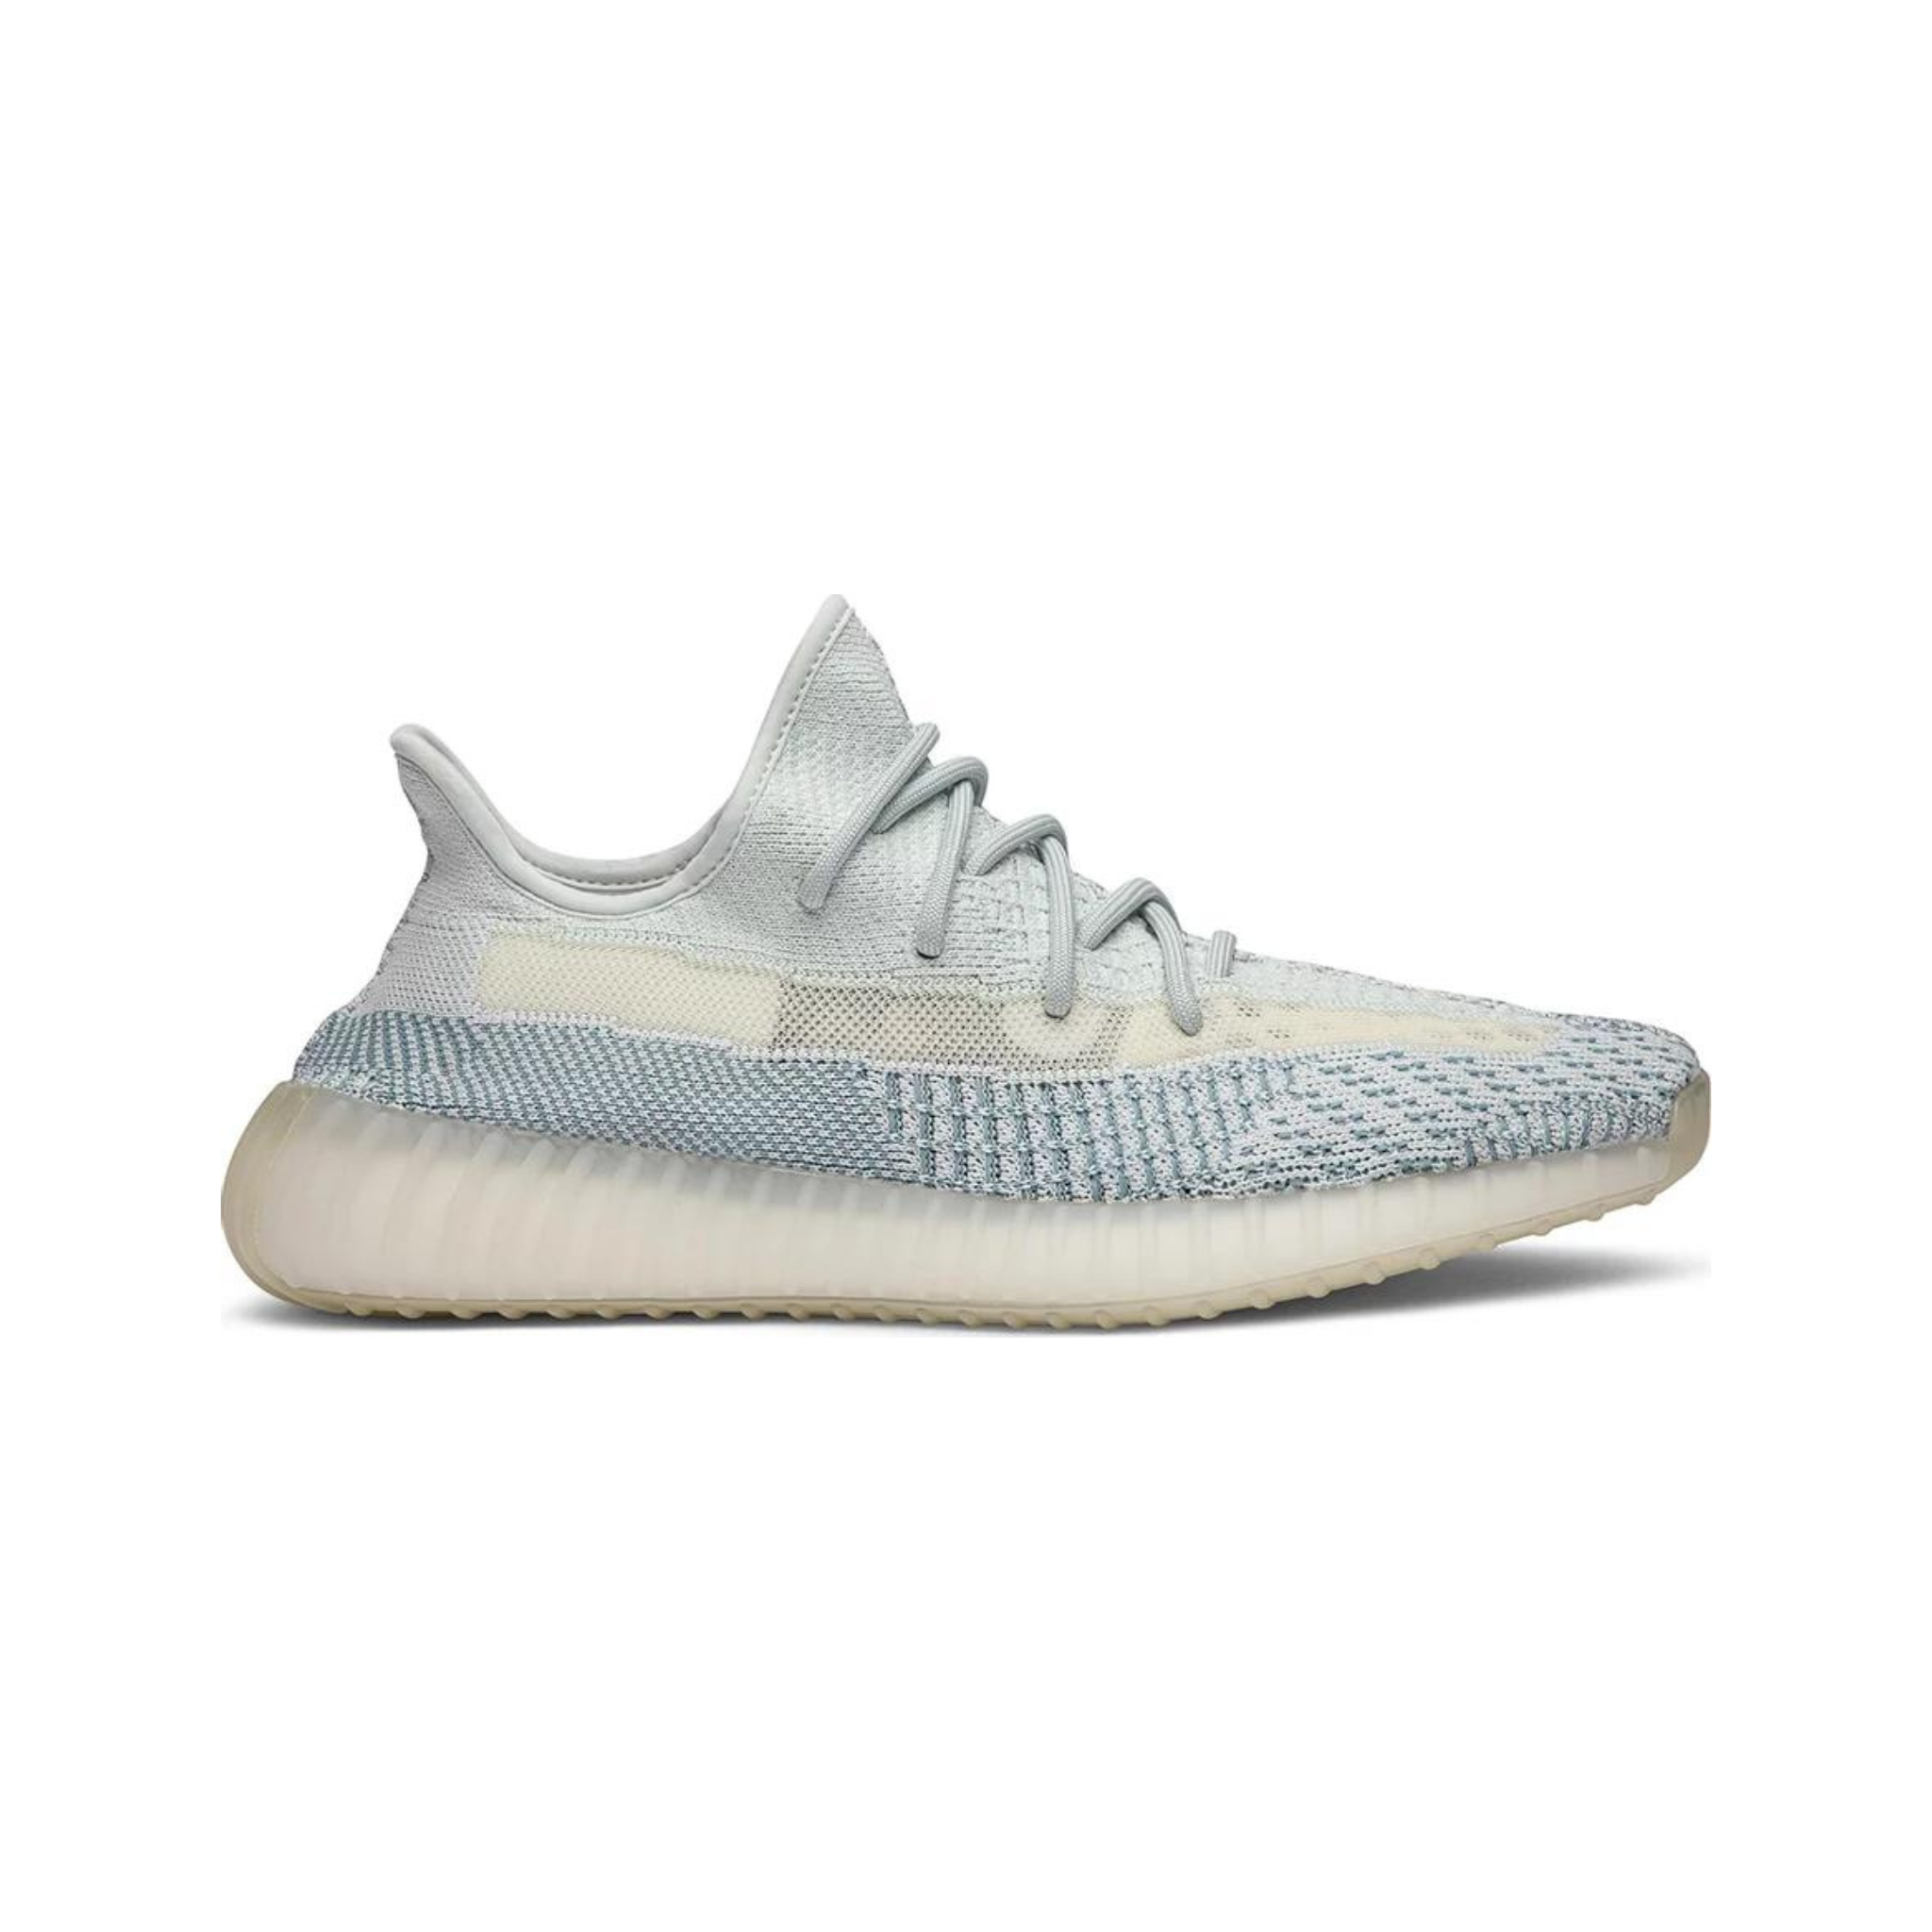 Adidas Yeezy Boost 350 V2 Cloud White (Non-Reflective)